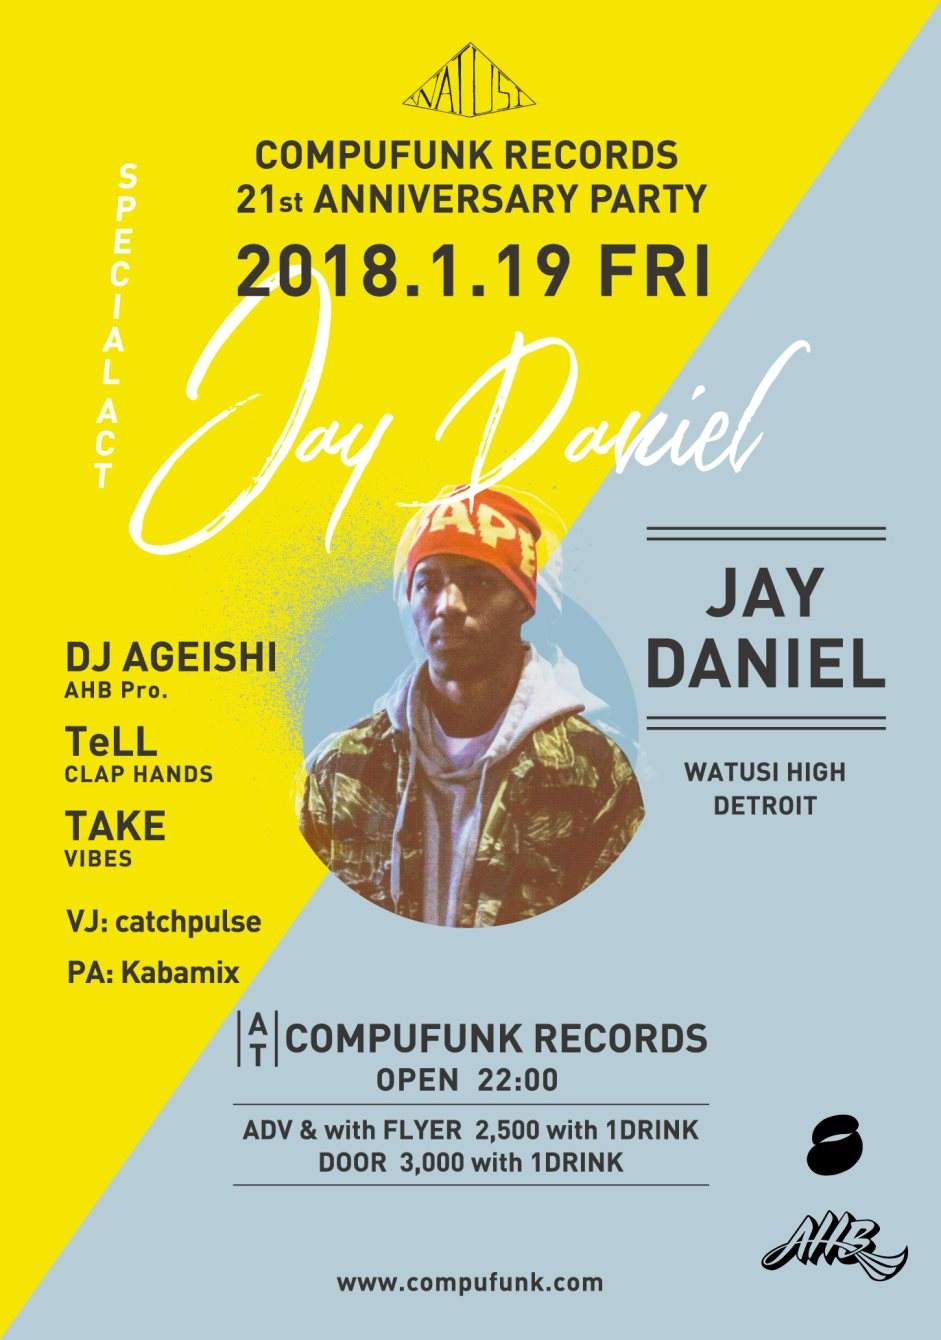 Compufunk Records 21st Anniversary Party - フライヤー表